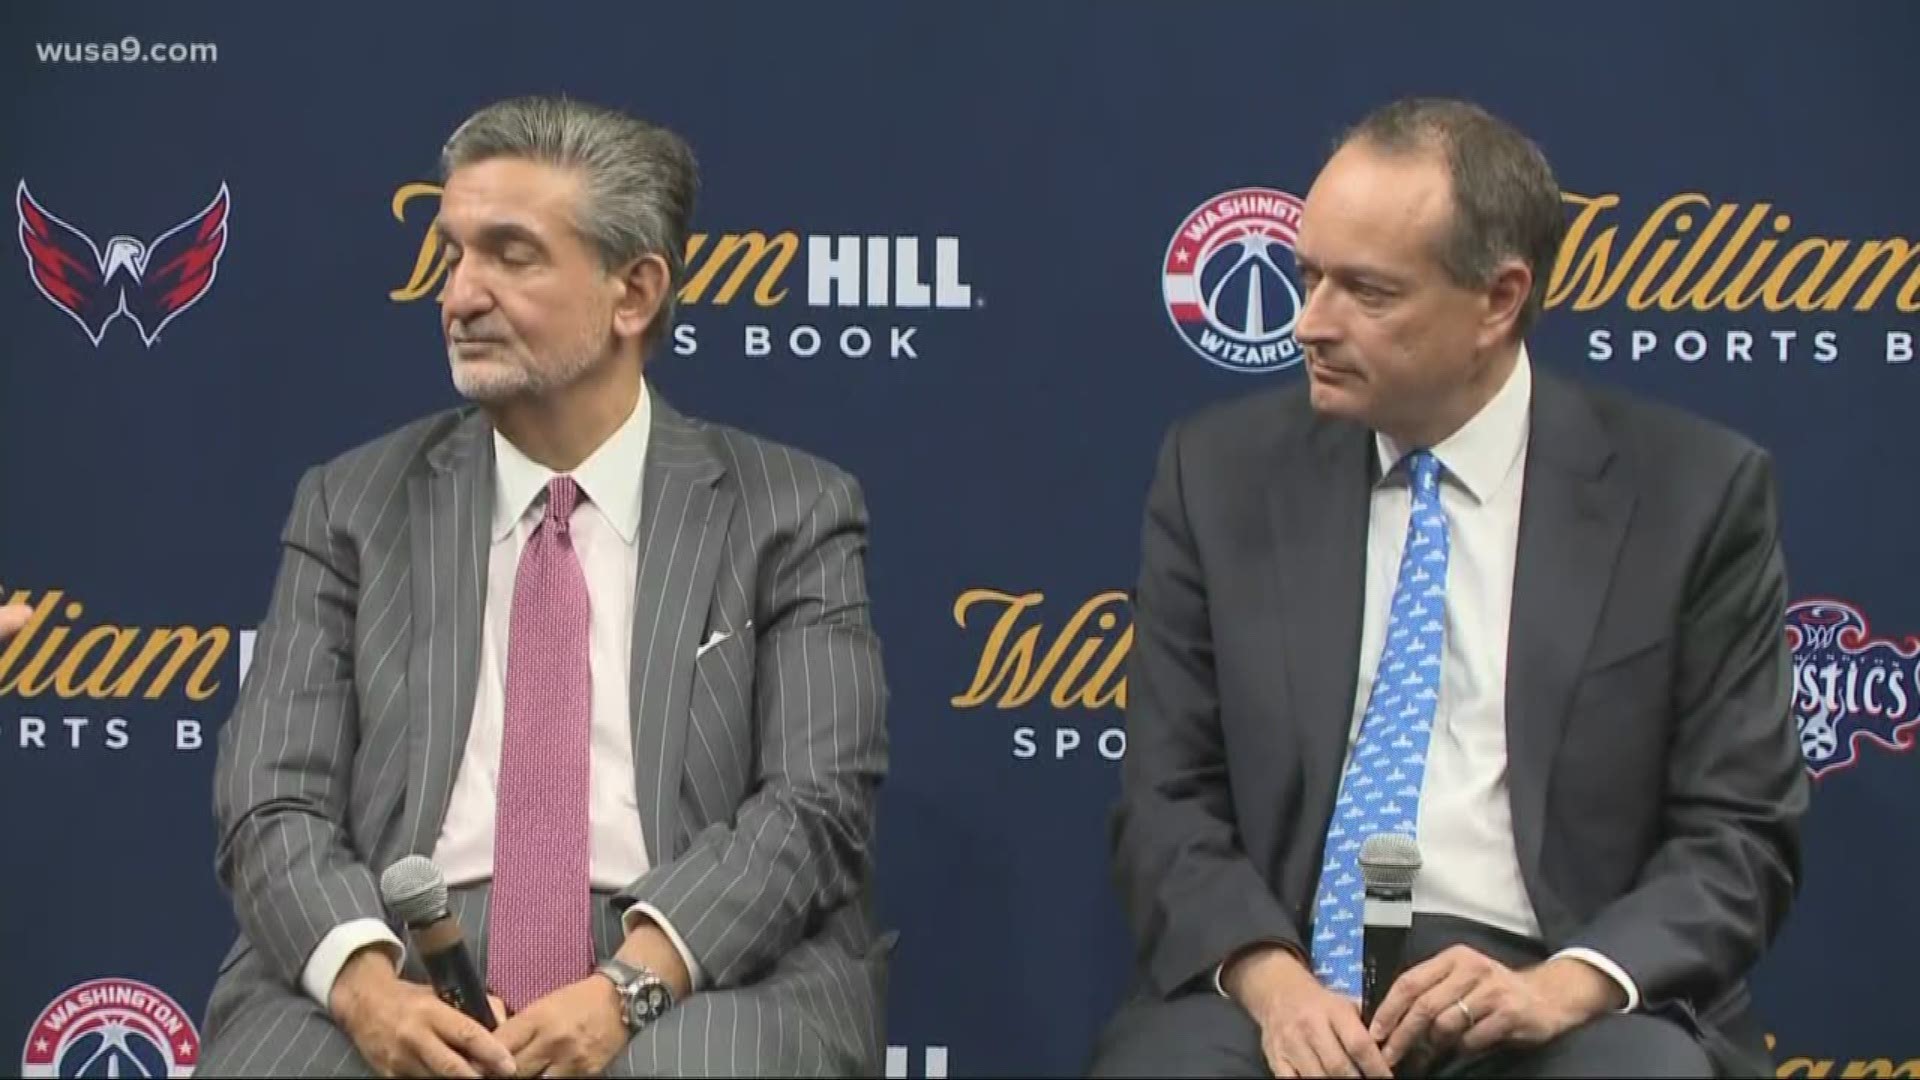 The William Hill Sports Book will be the first betting facility at a professional sports venue in the U.S.